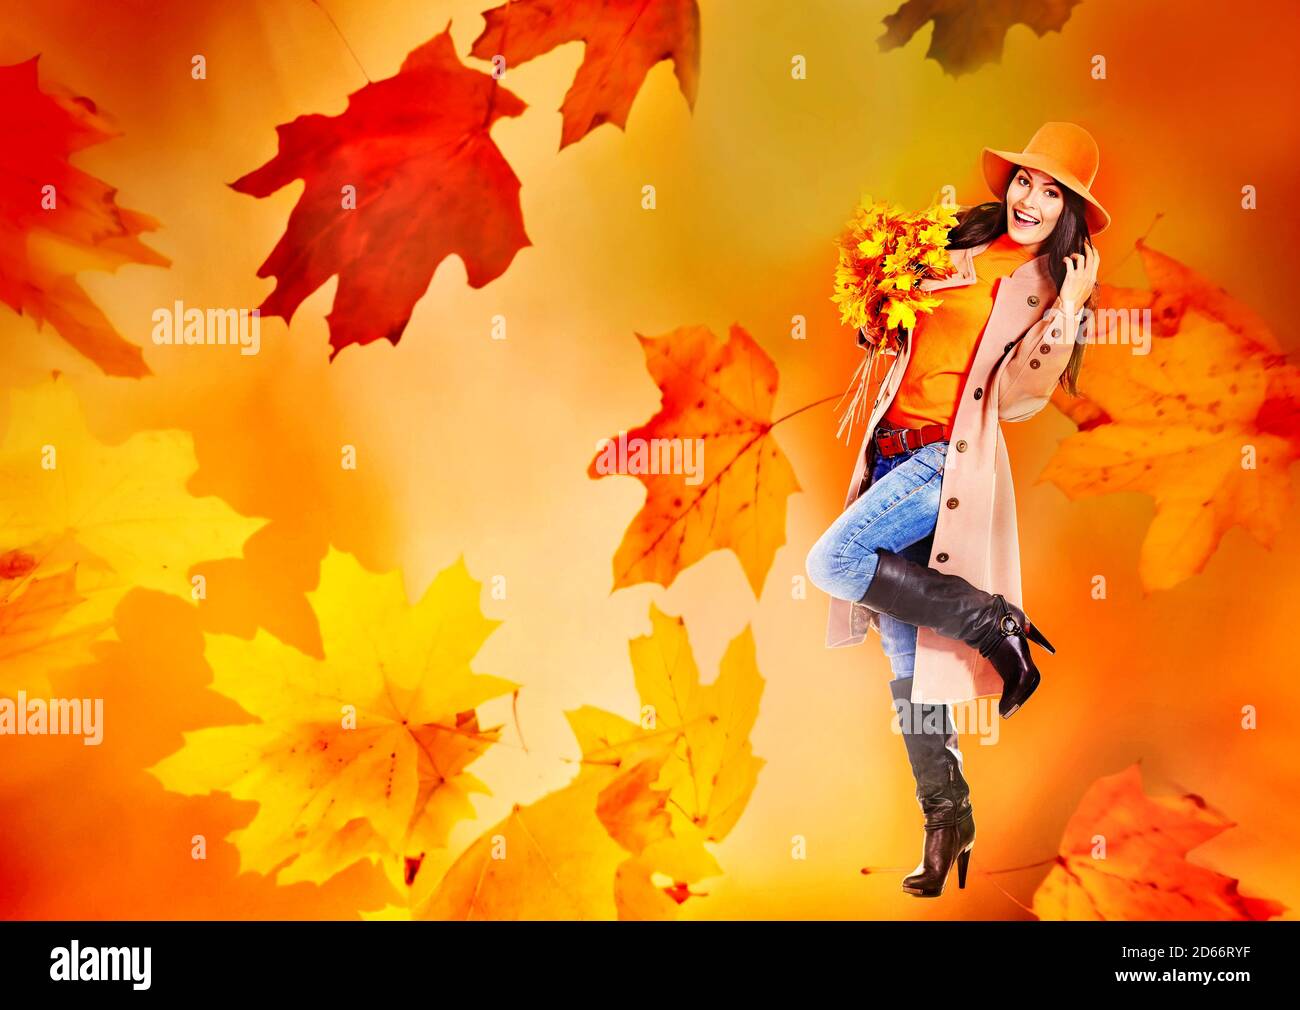 Autumn banners leaves with woman wear in coat and hat Stock Photo